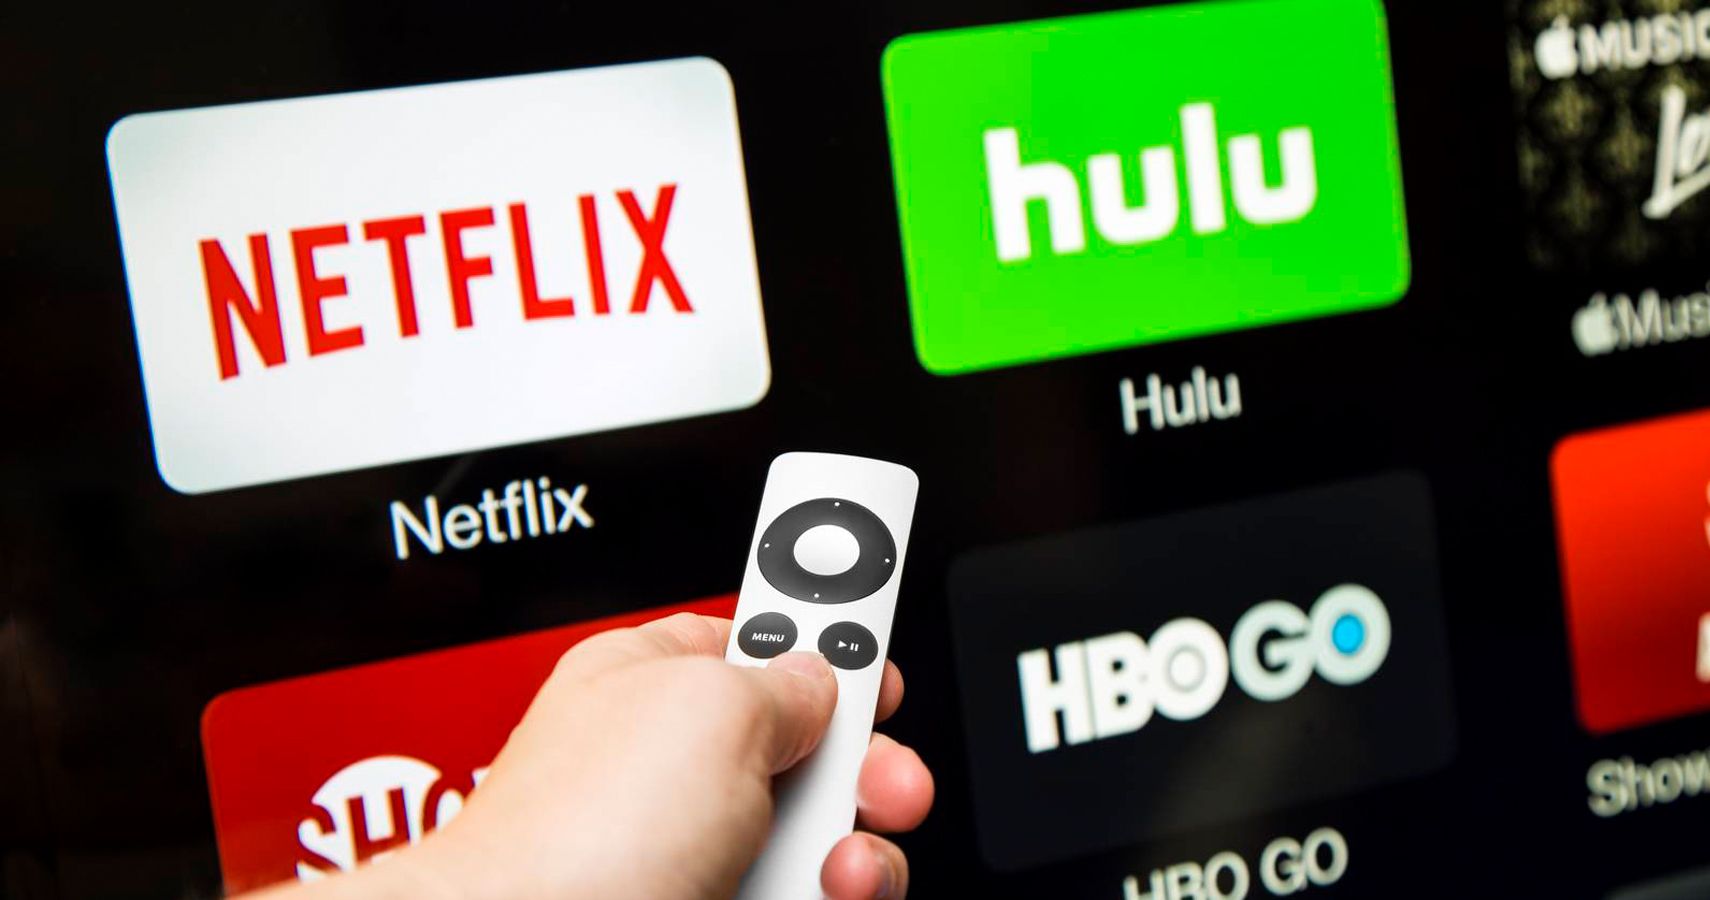 47% of Consumers Think There Are Too Many Streaming Services to Manage